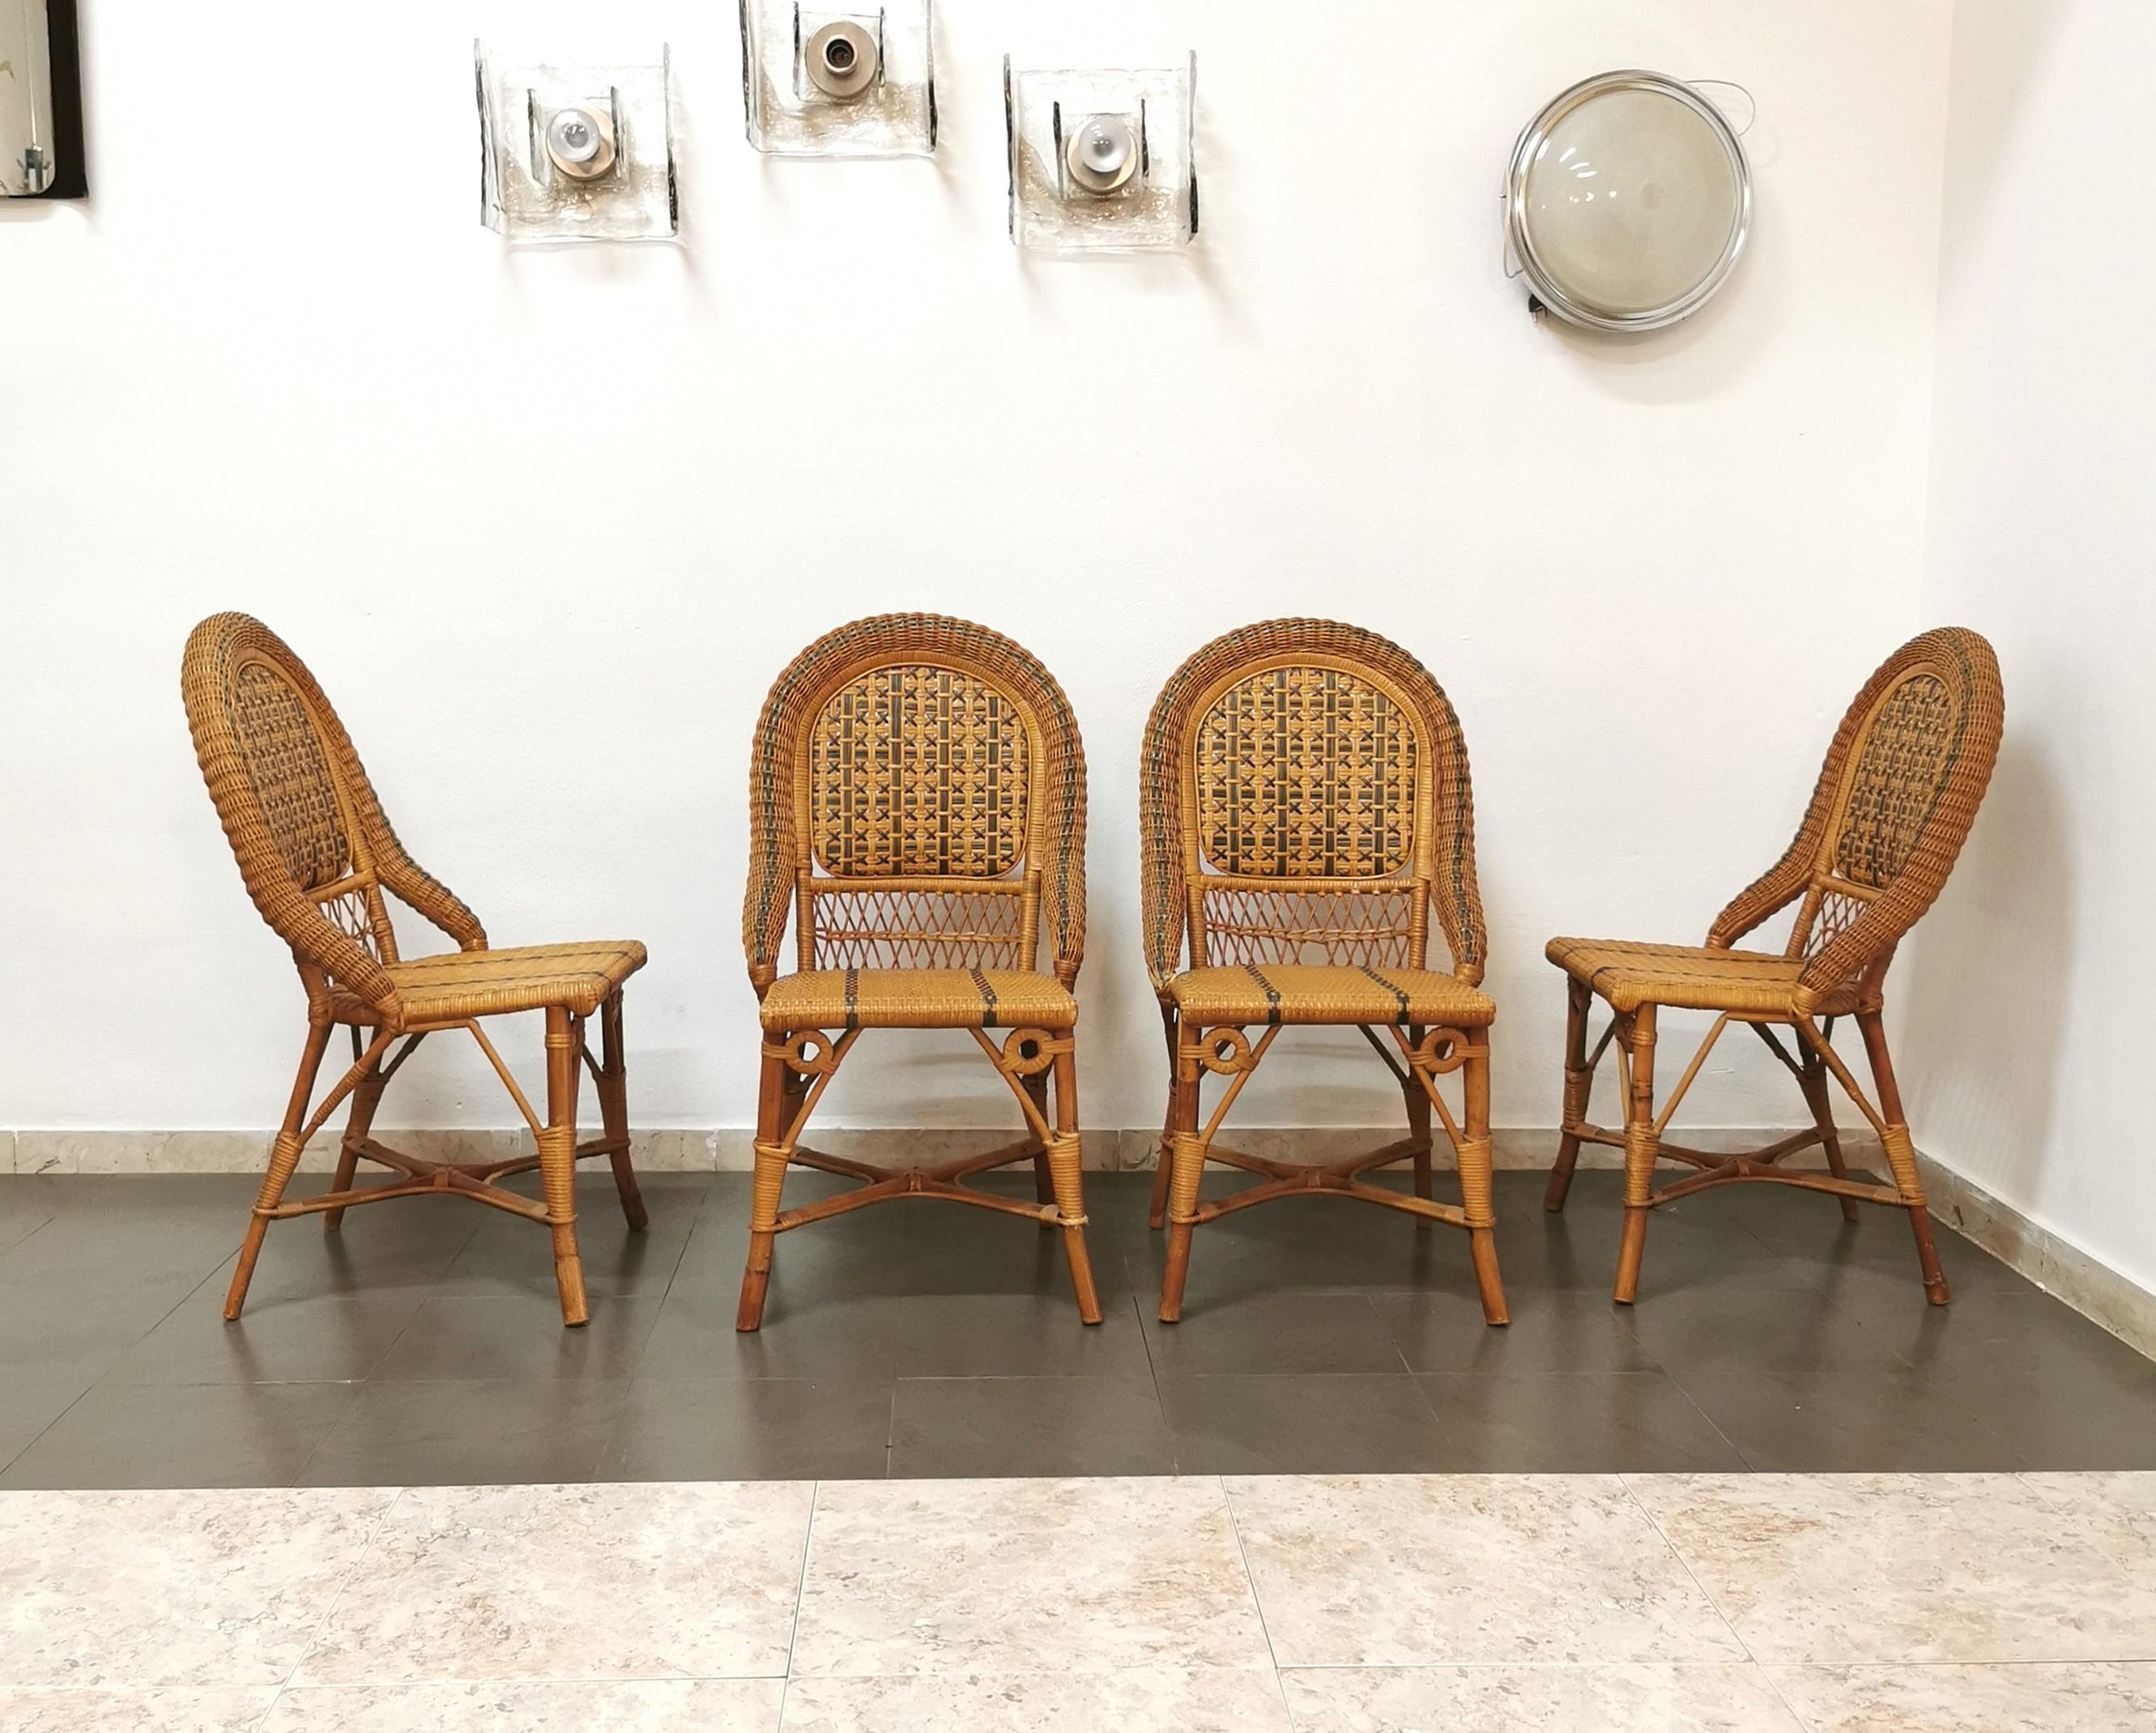 Set of 4 dining or living room chairs produced in Italy in the 70s by the Vivai del sud company. Every single chair has been made of bamboo and rattan, with the particularity of the green weaves on the seat and back with a rounded shape.